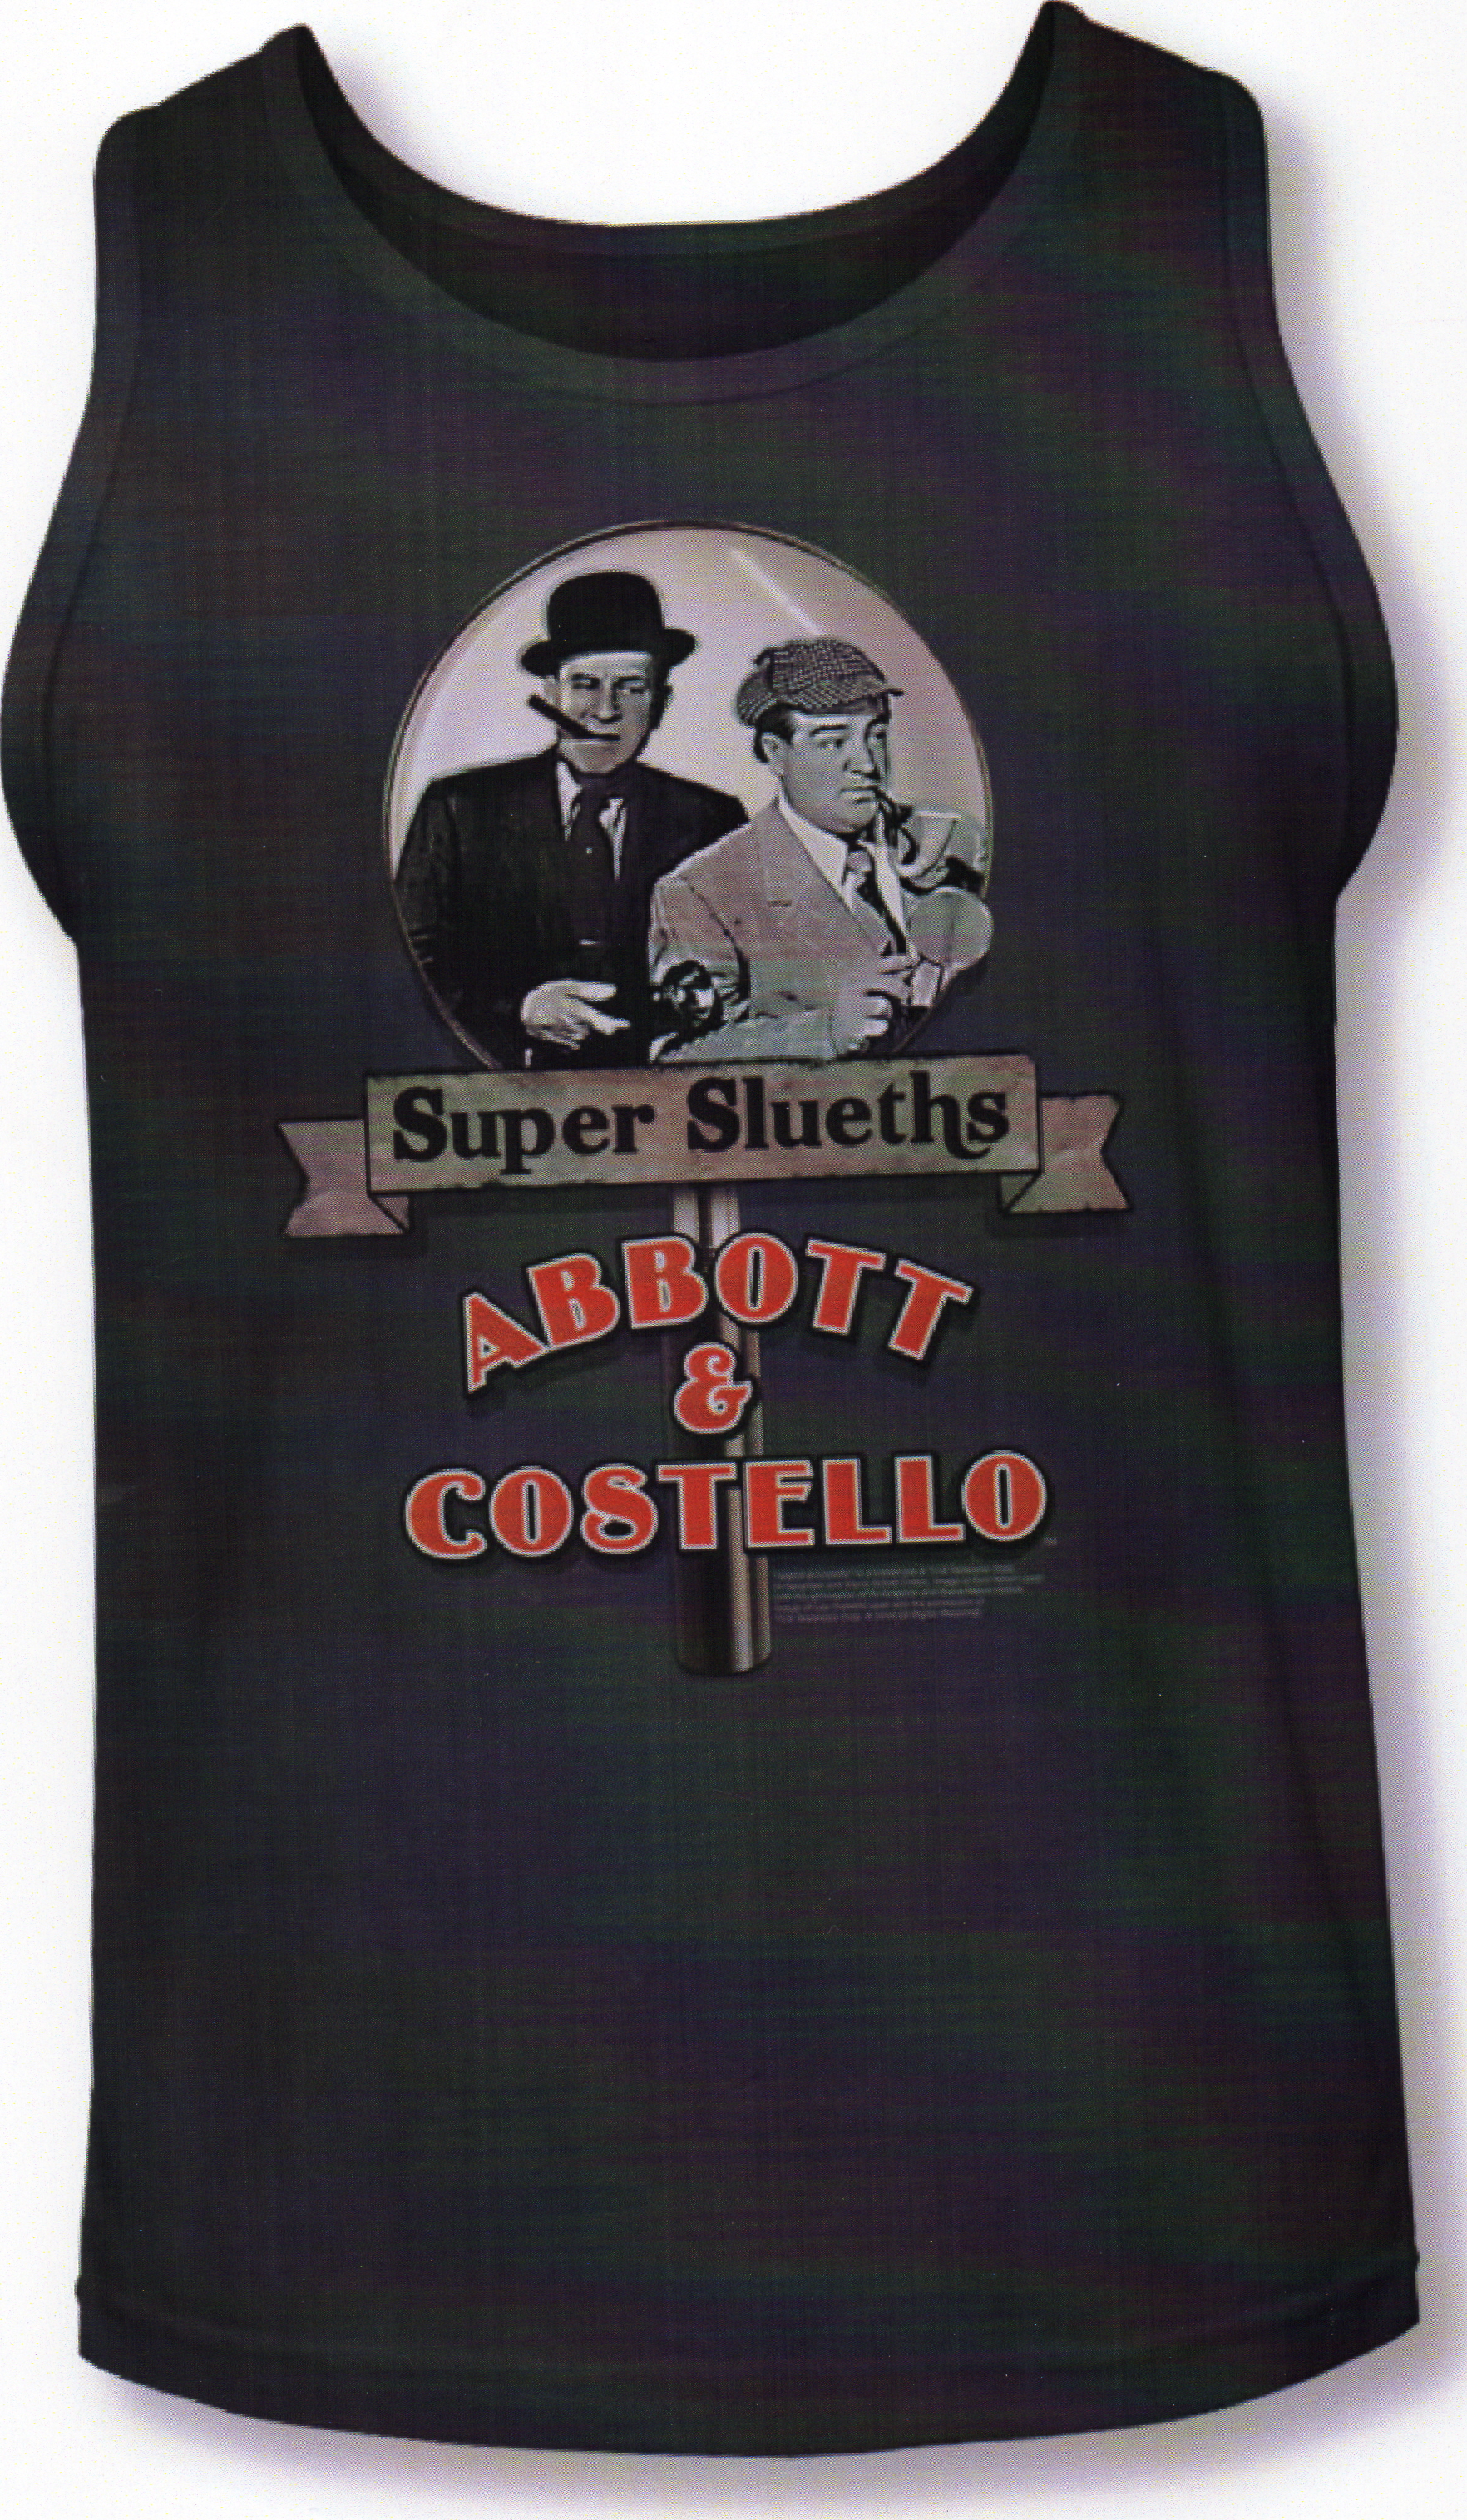 Super Sleuths Tank Top